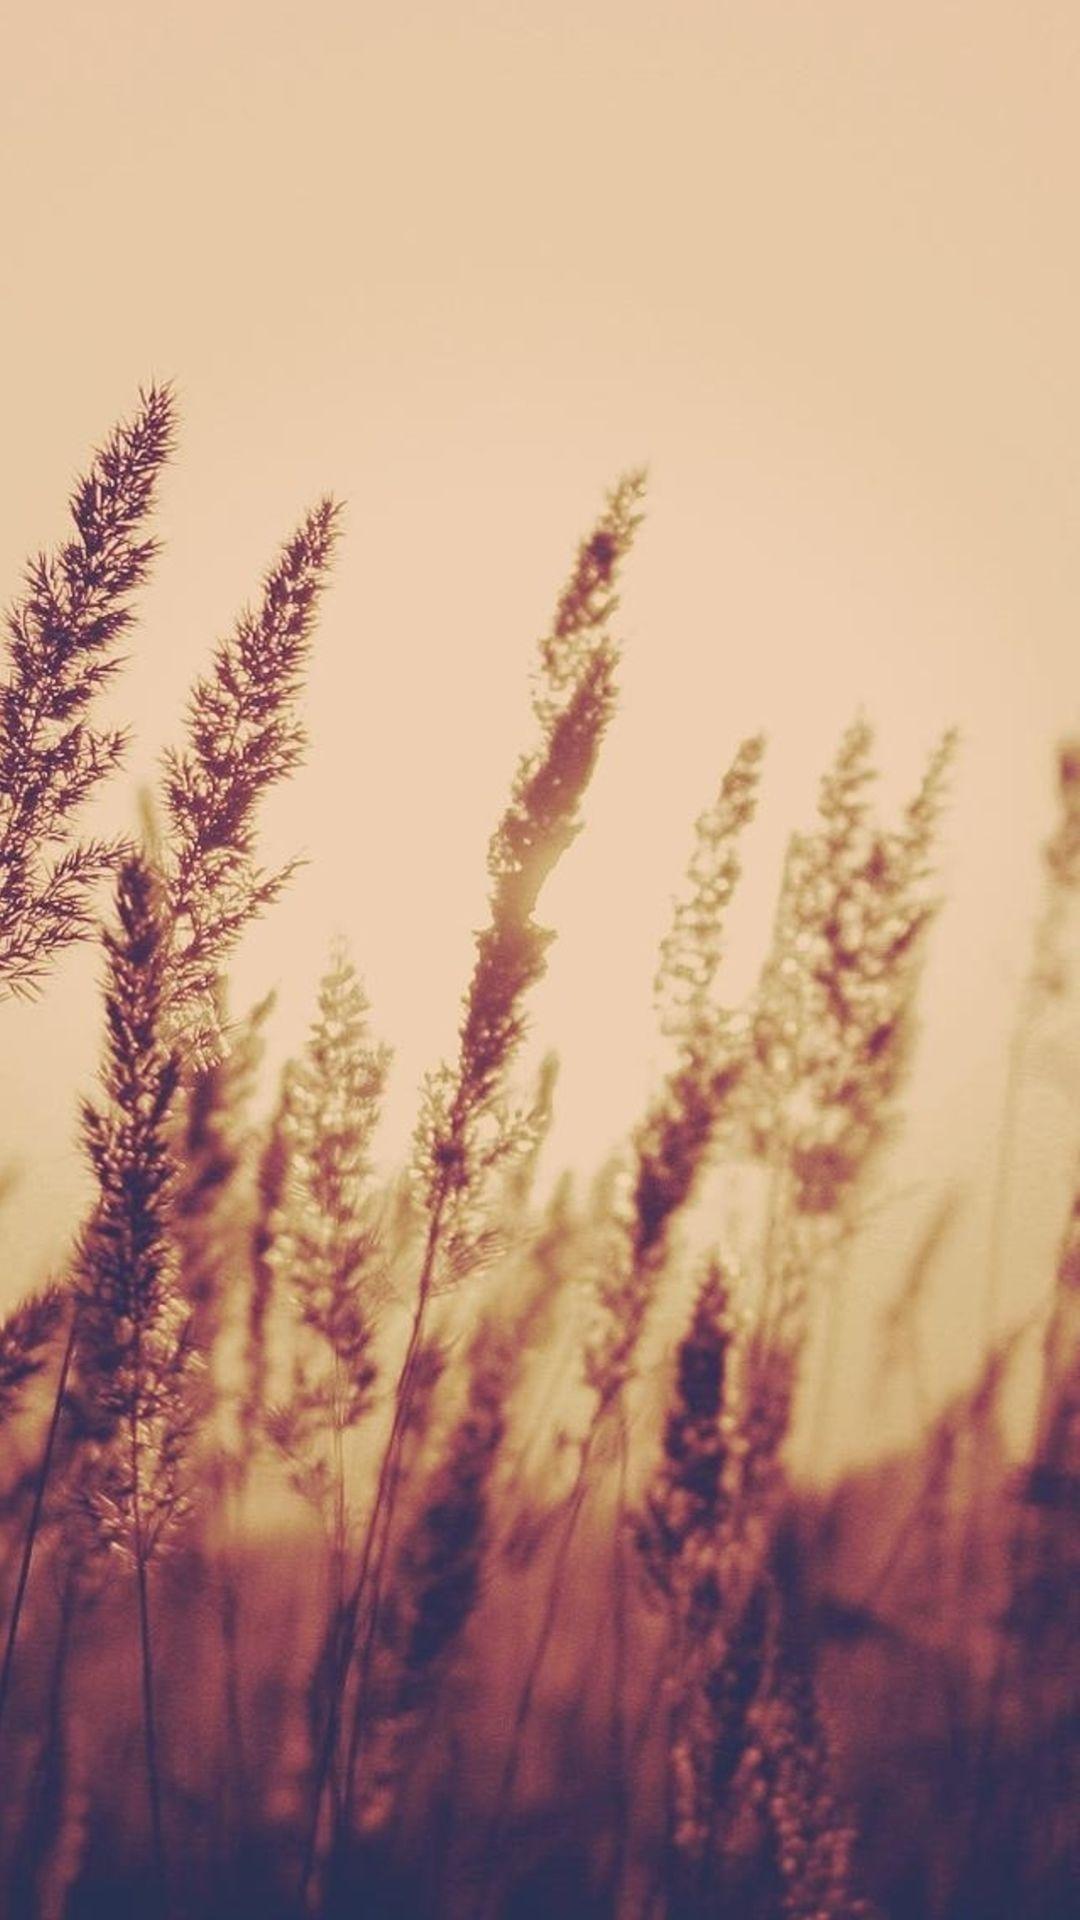 A field of tall grass with the sun setting in it - Blurry, nature, plants, sunlight